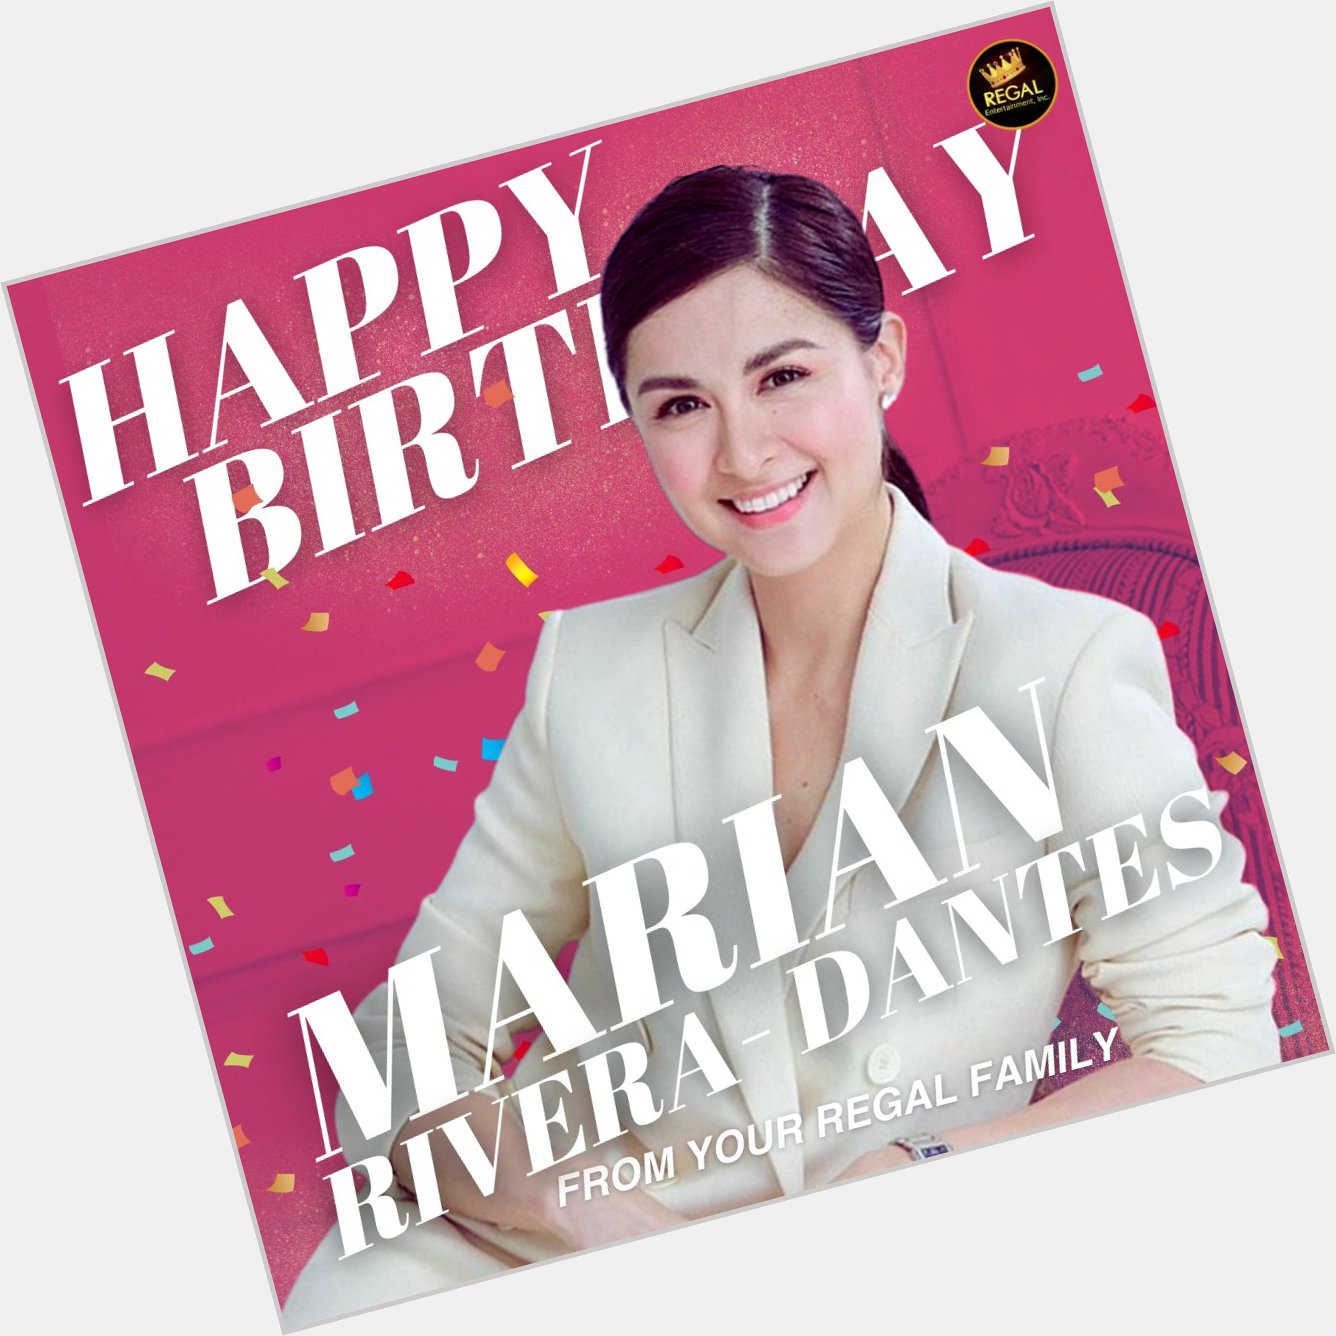 Happy Birthday, Marian Rivera! We wish you all the best in life! God bless! From your Regal Family   